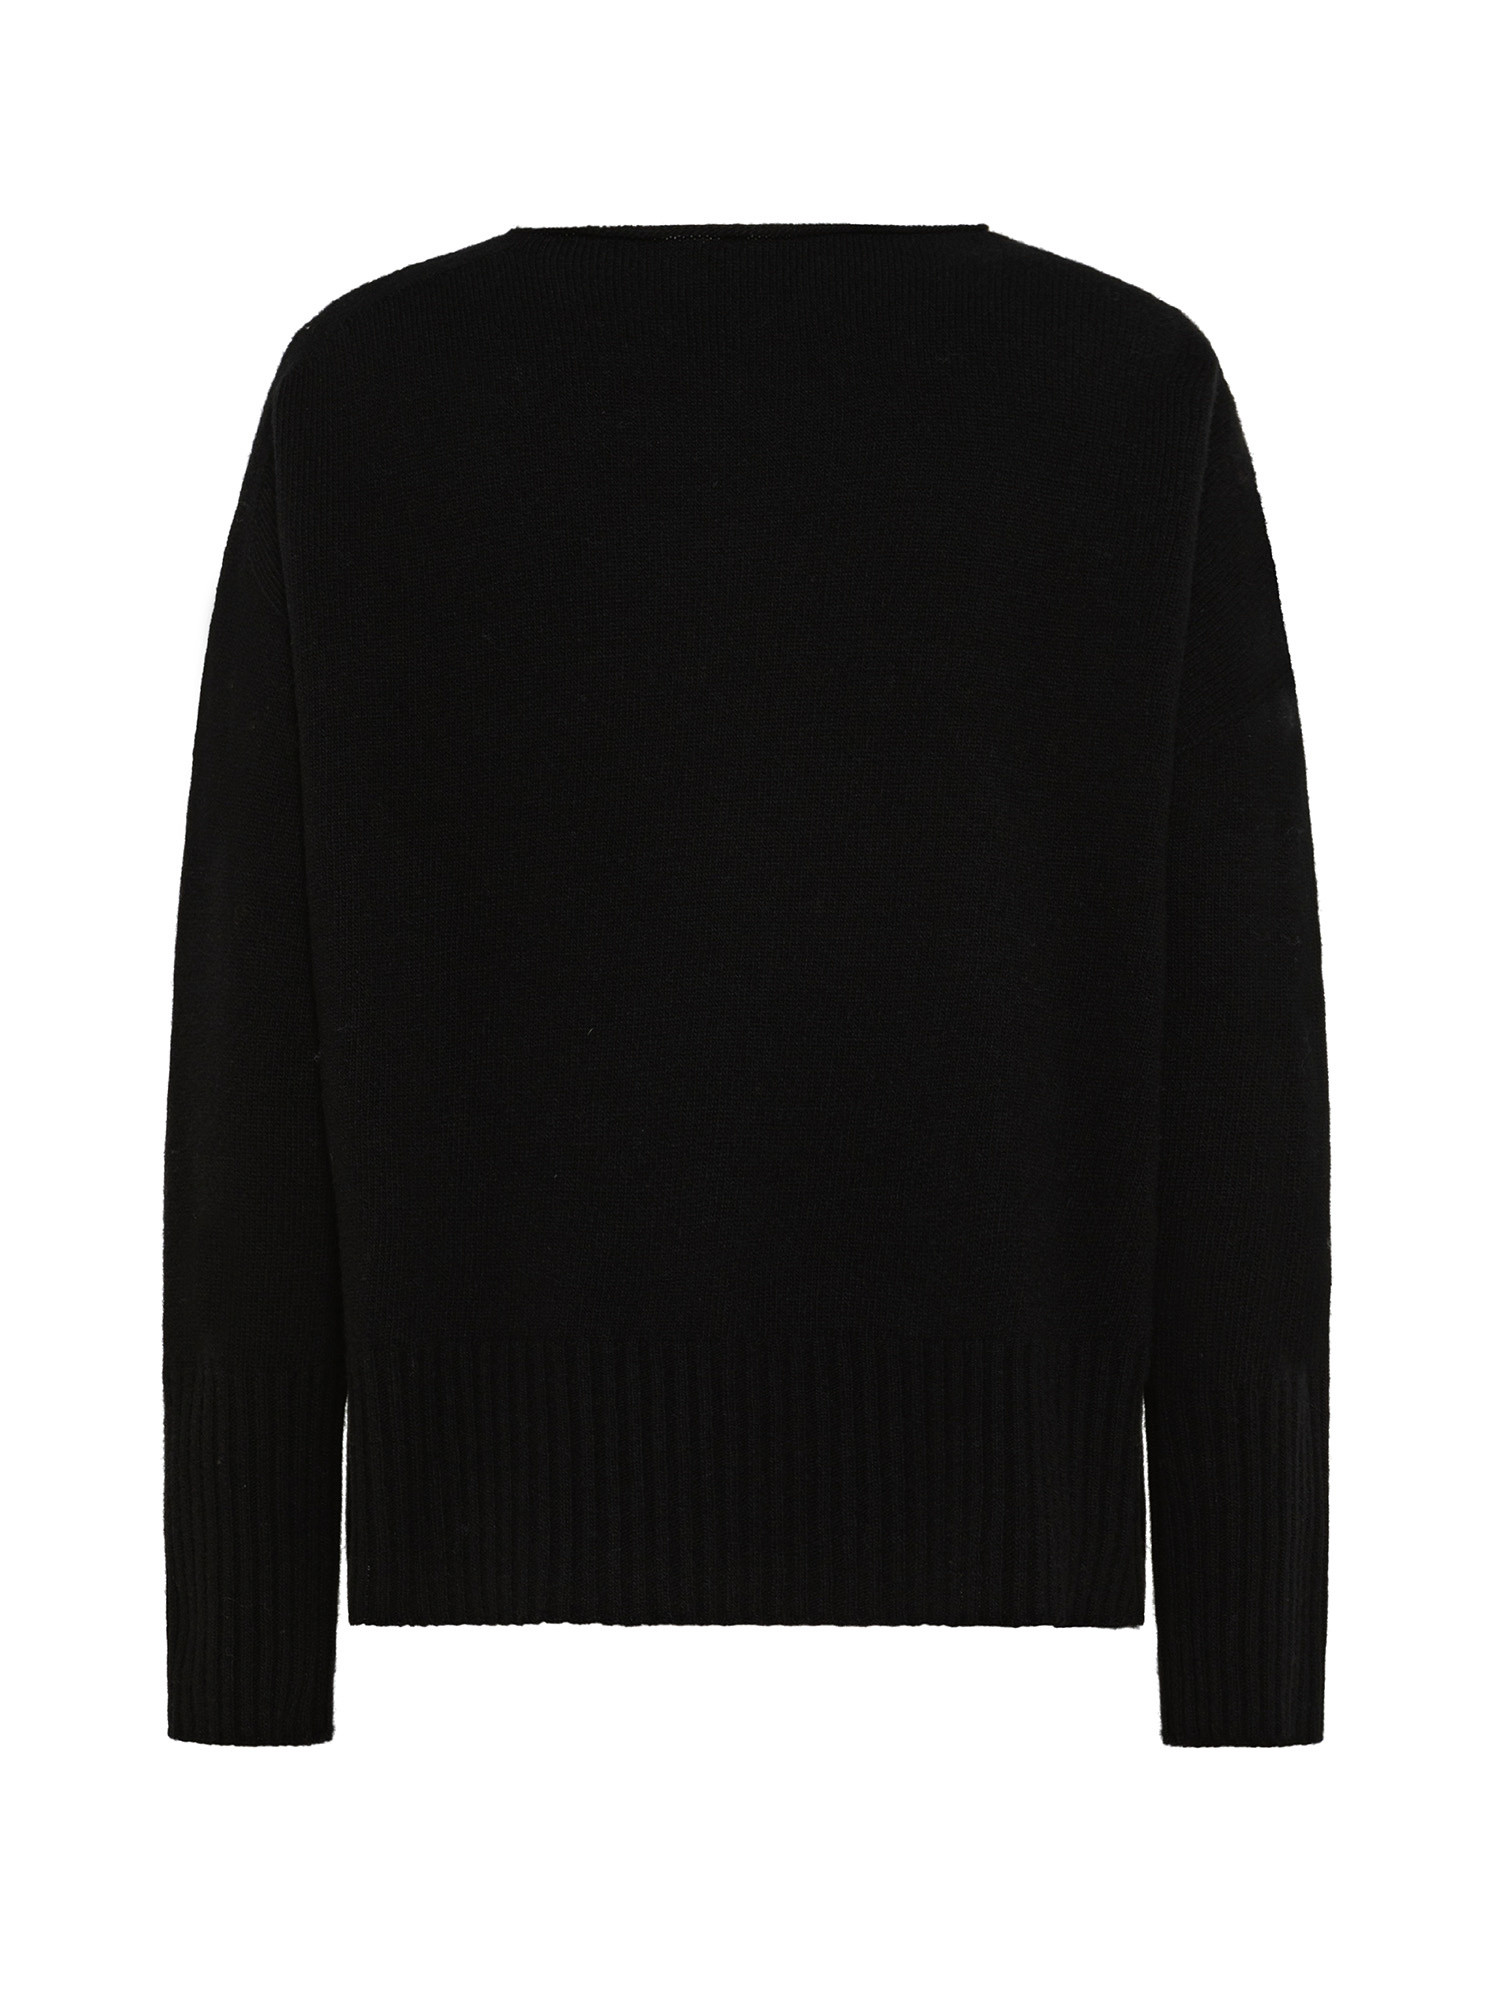 K Collection - Carded wool pullover, Black, large image number 1